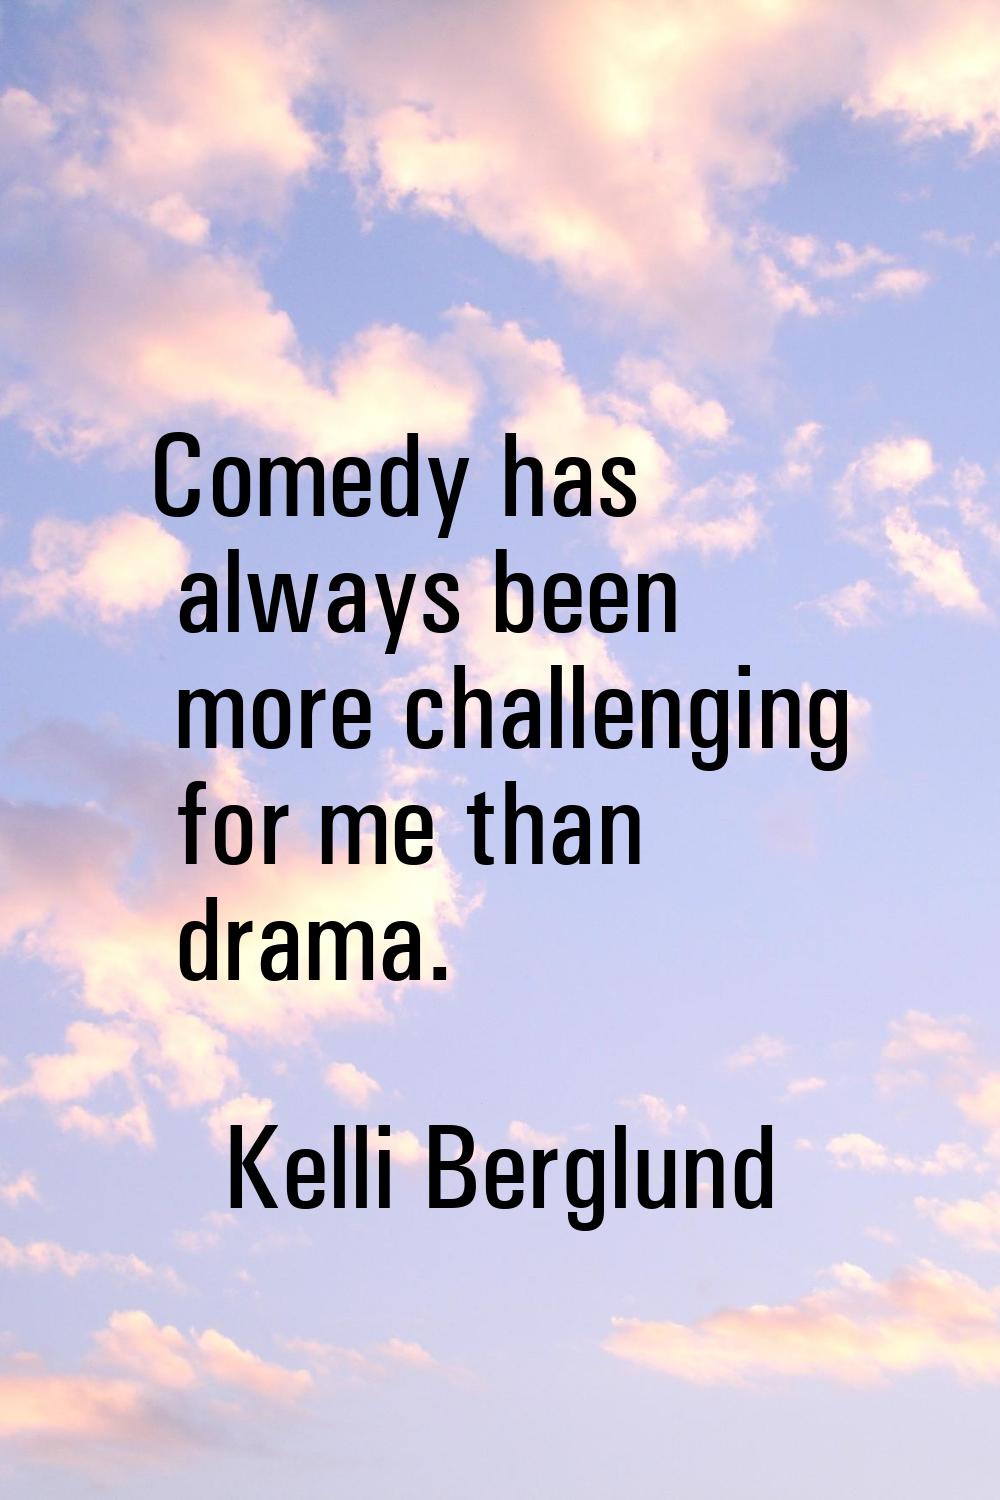 Comedy has always been more challenging for me than drama.